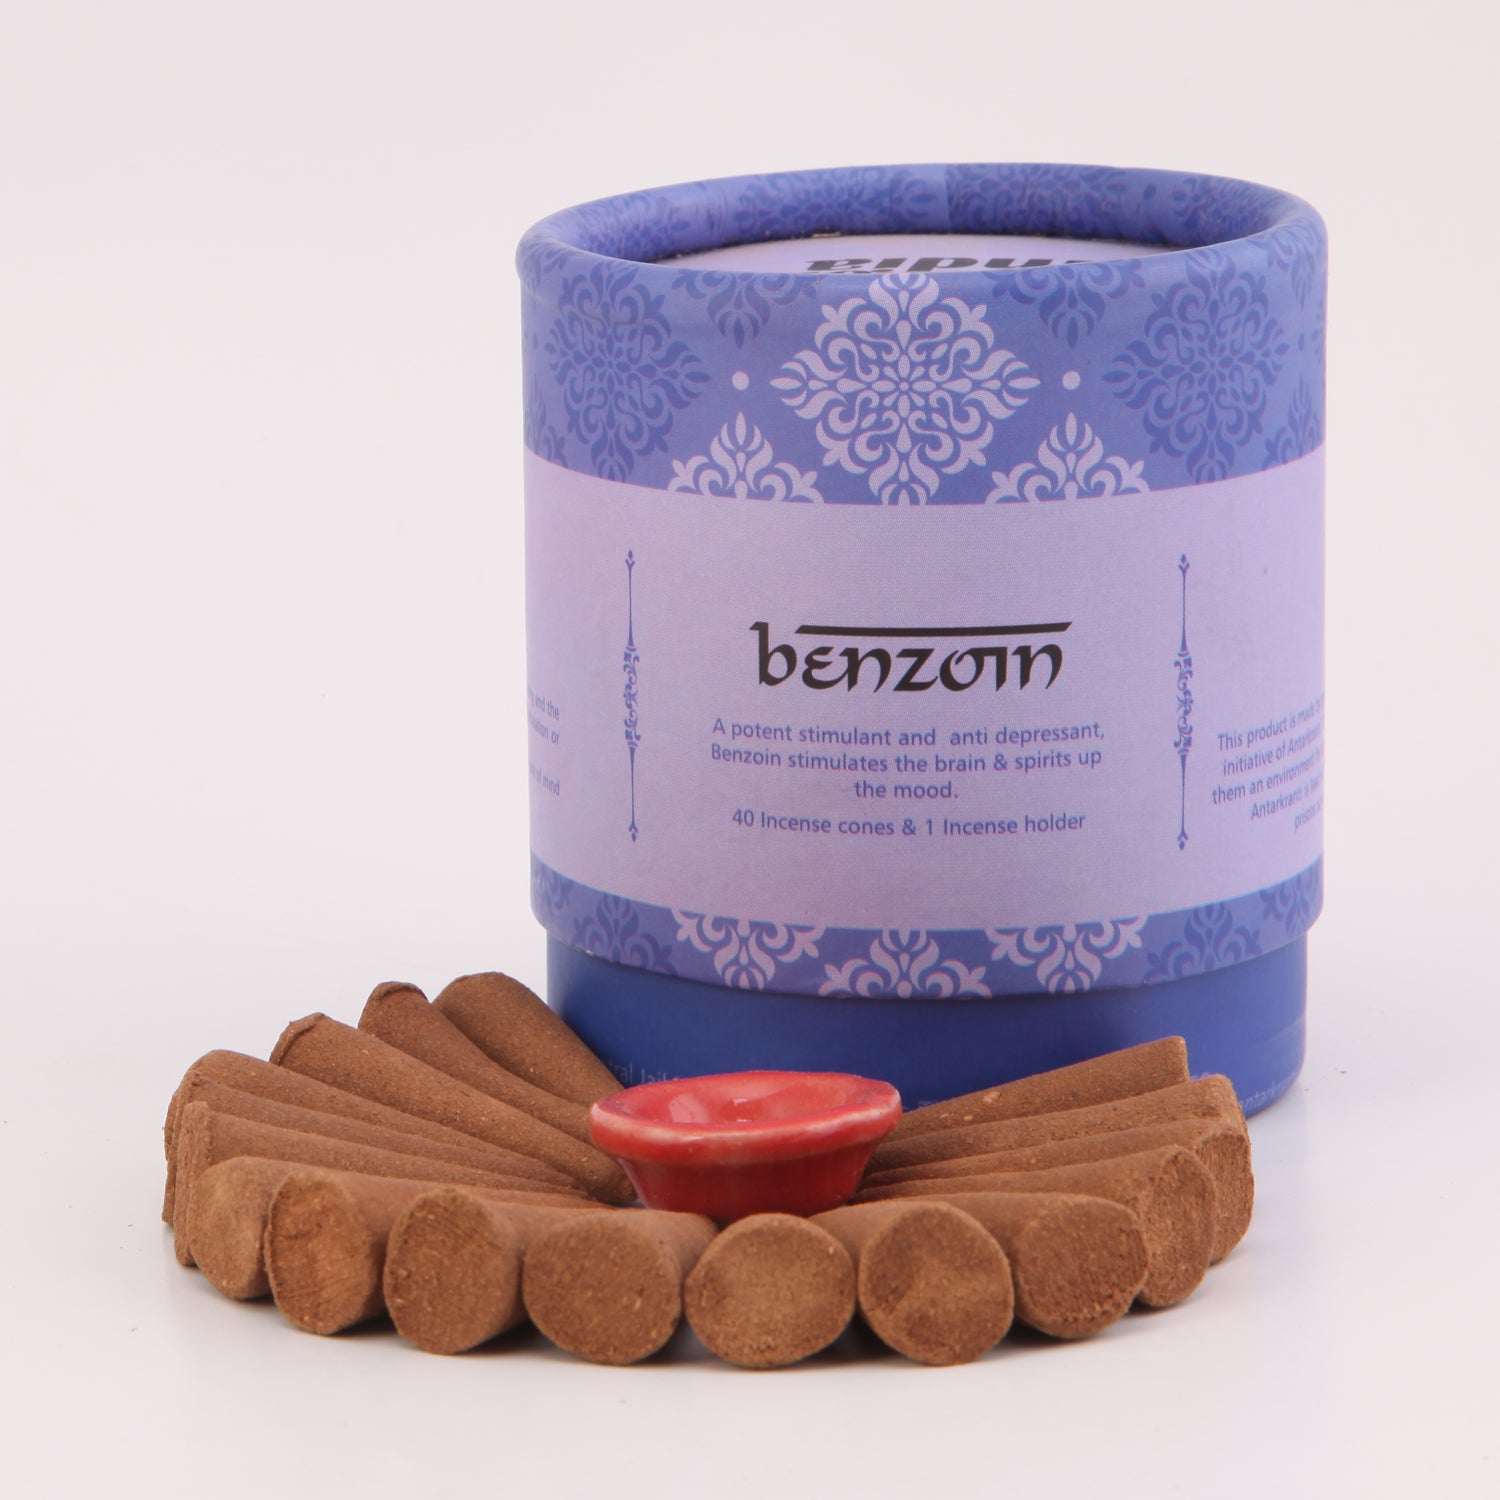 Benzoin Natural Incense Dhoop cones with a Cone holder | Charcoal free